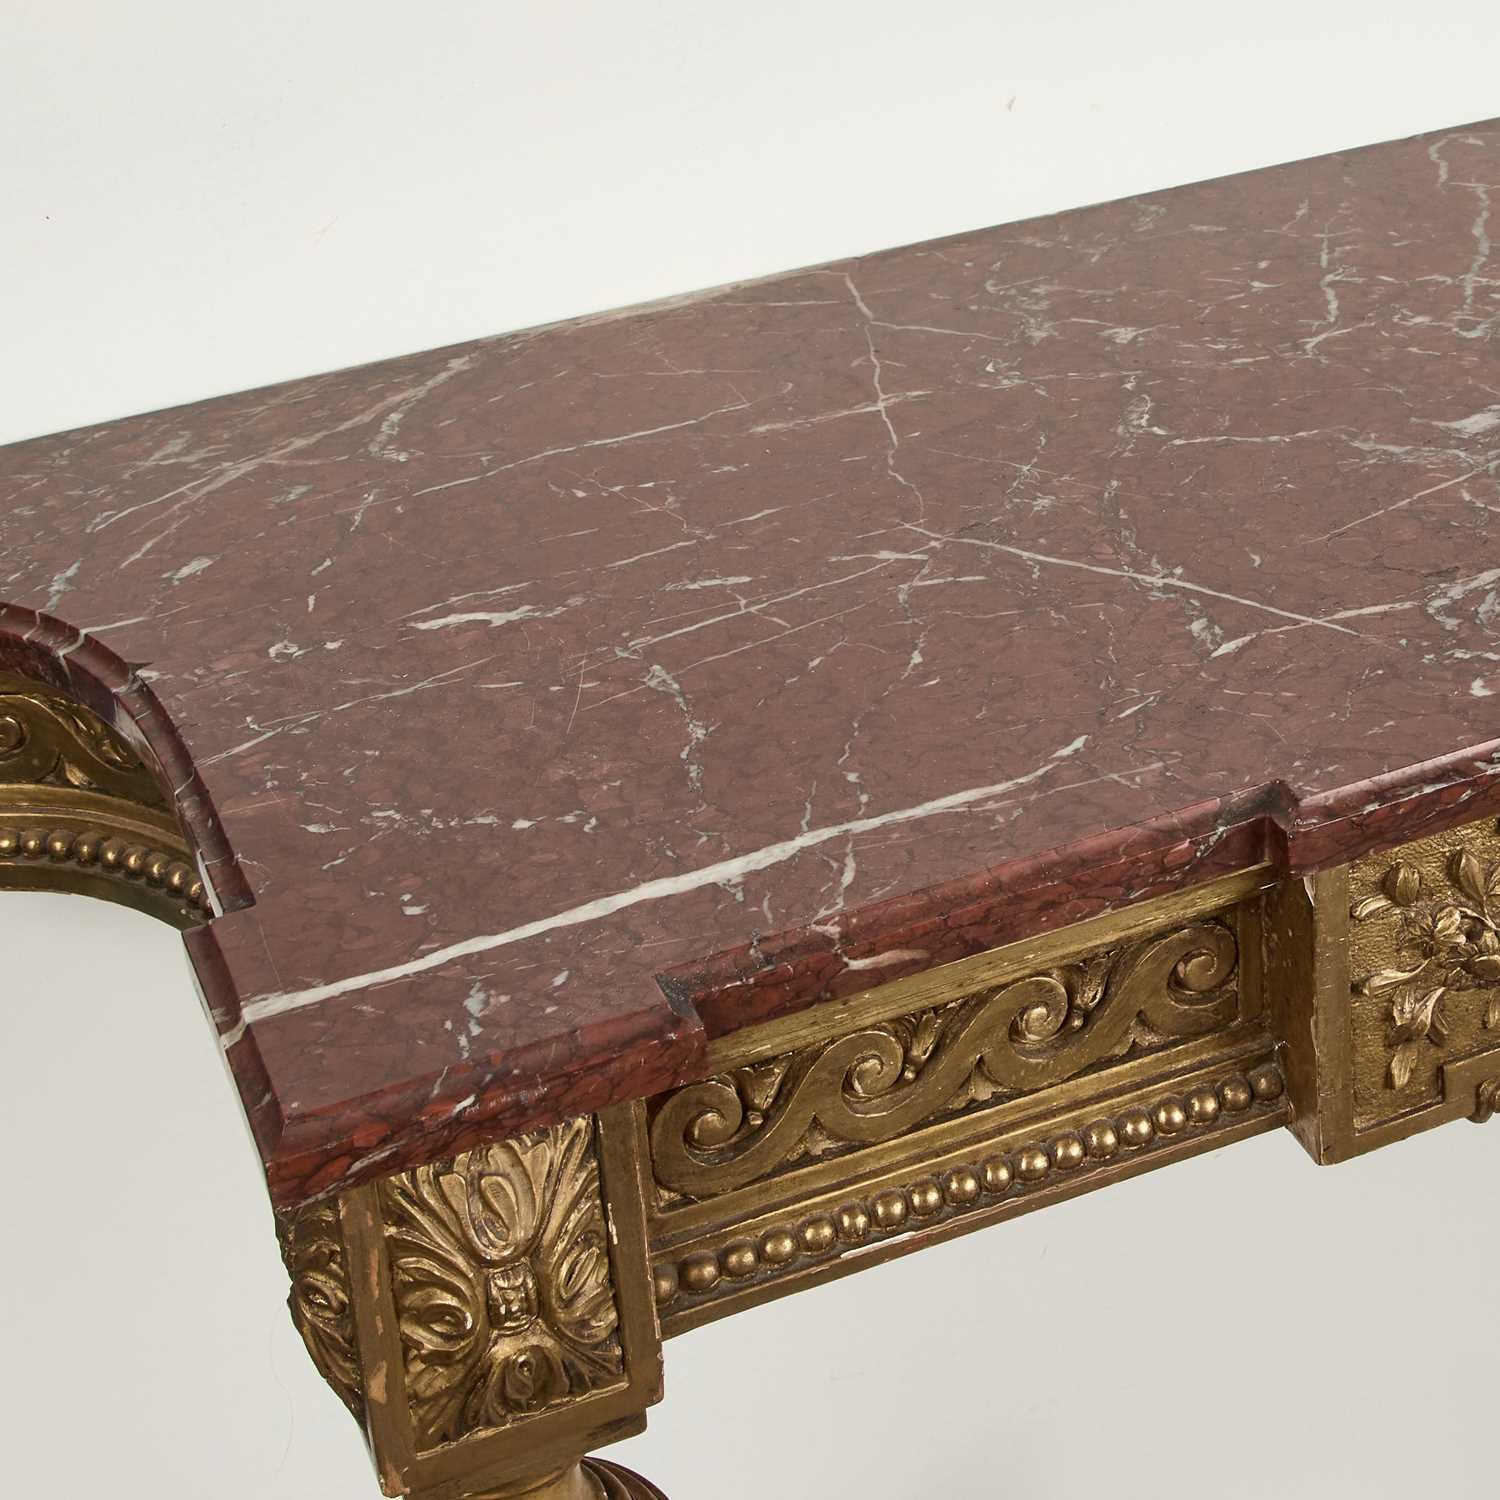 AN EMPIRE STYLE MARBLE-TOPPED GILTWOOD CONSOLE TABLE - Image 2 of 2